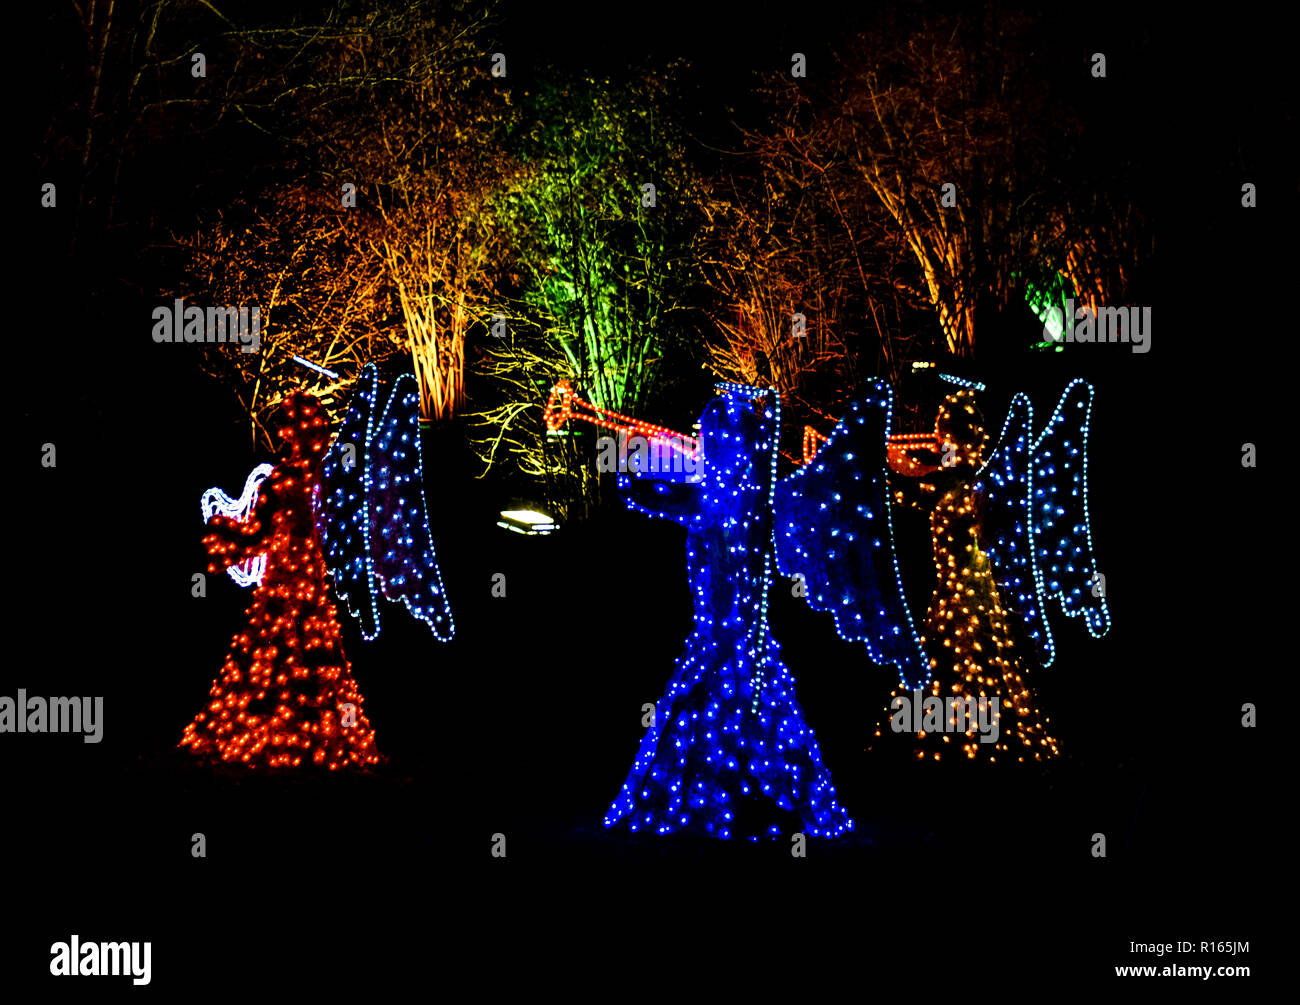 Coloured outdoor christmas lights angels and trees Stock Photo